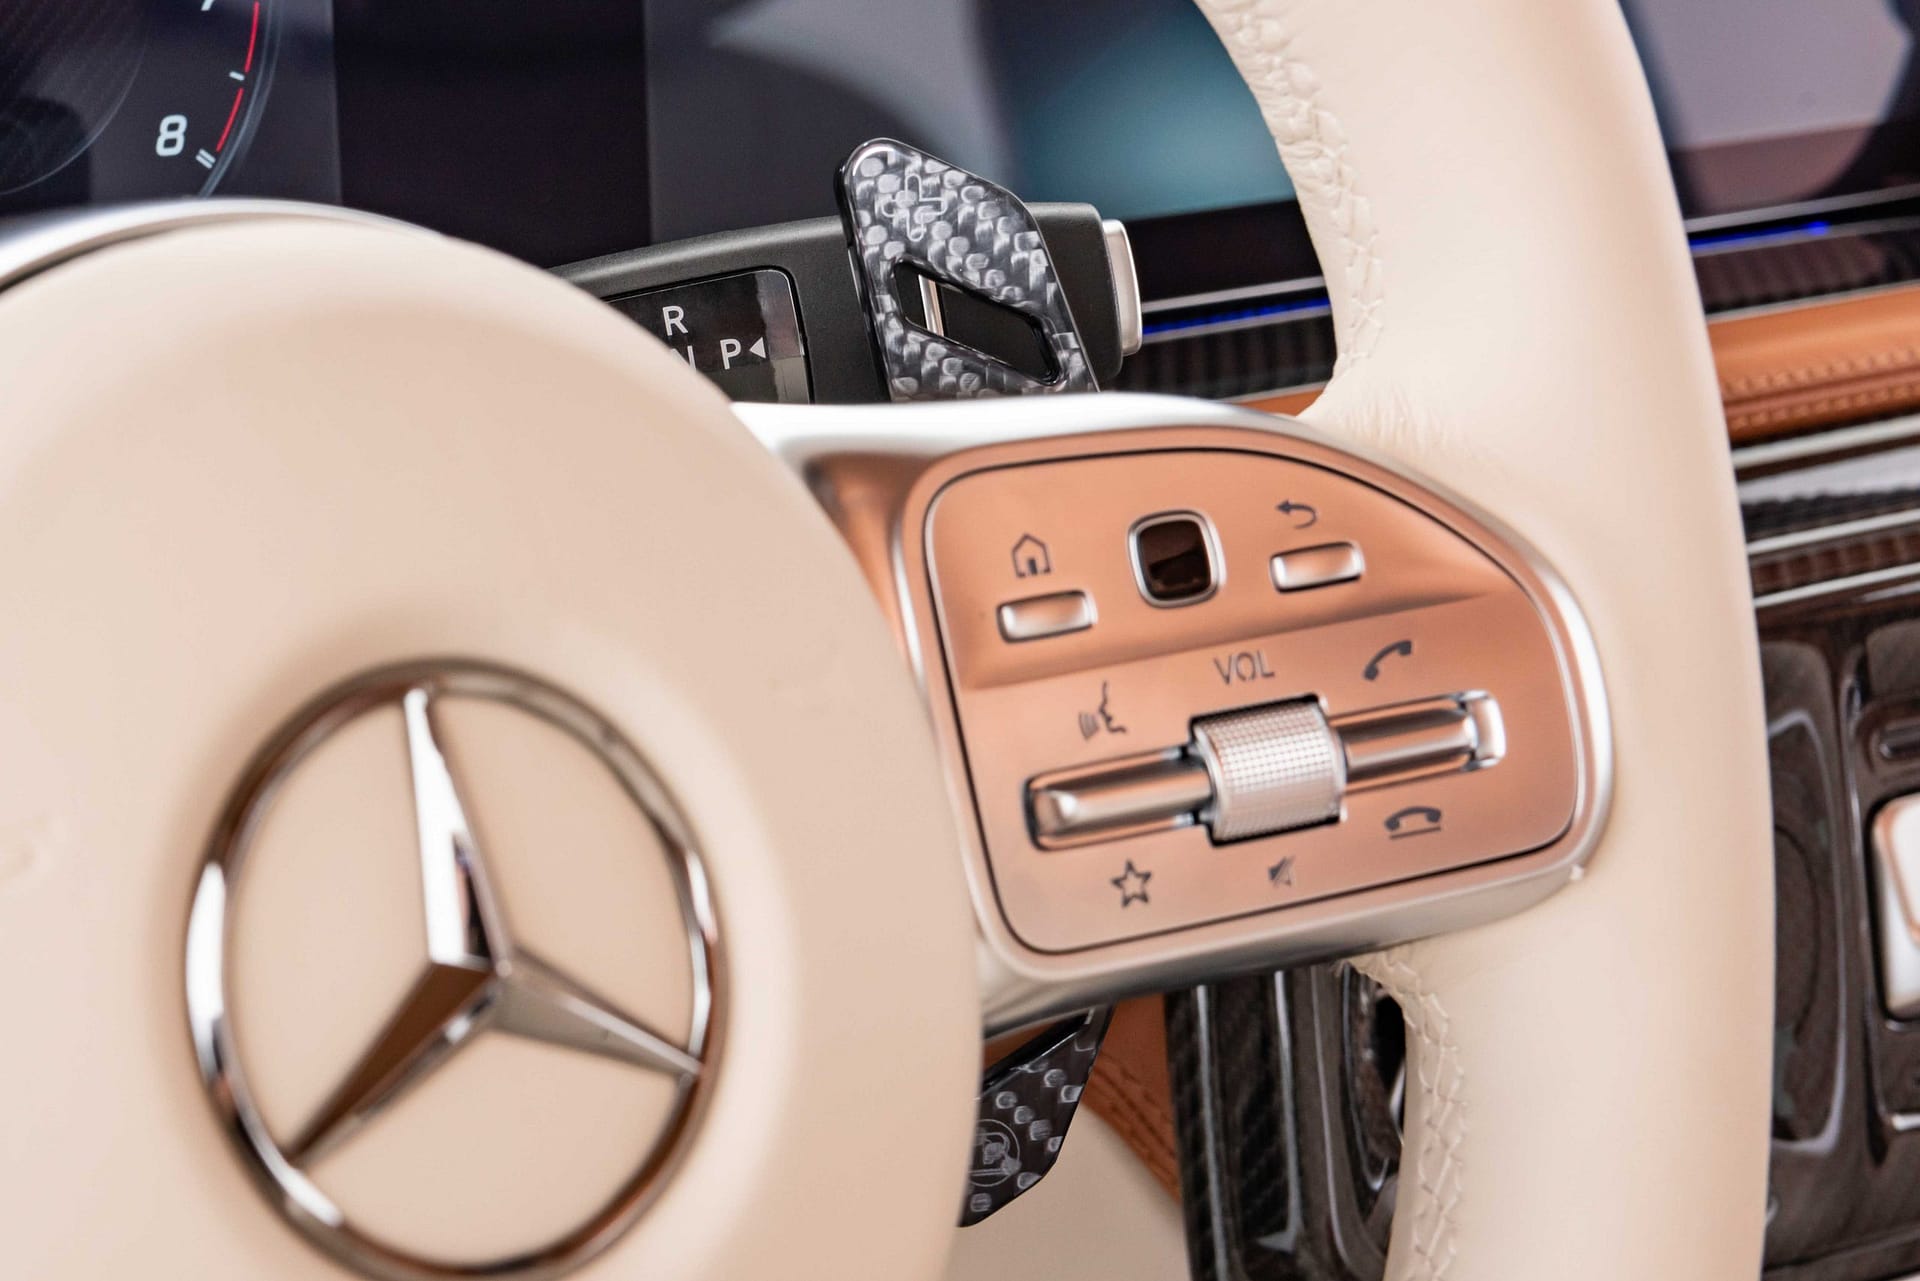 BRABUS rose gold buttons